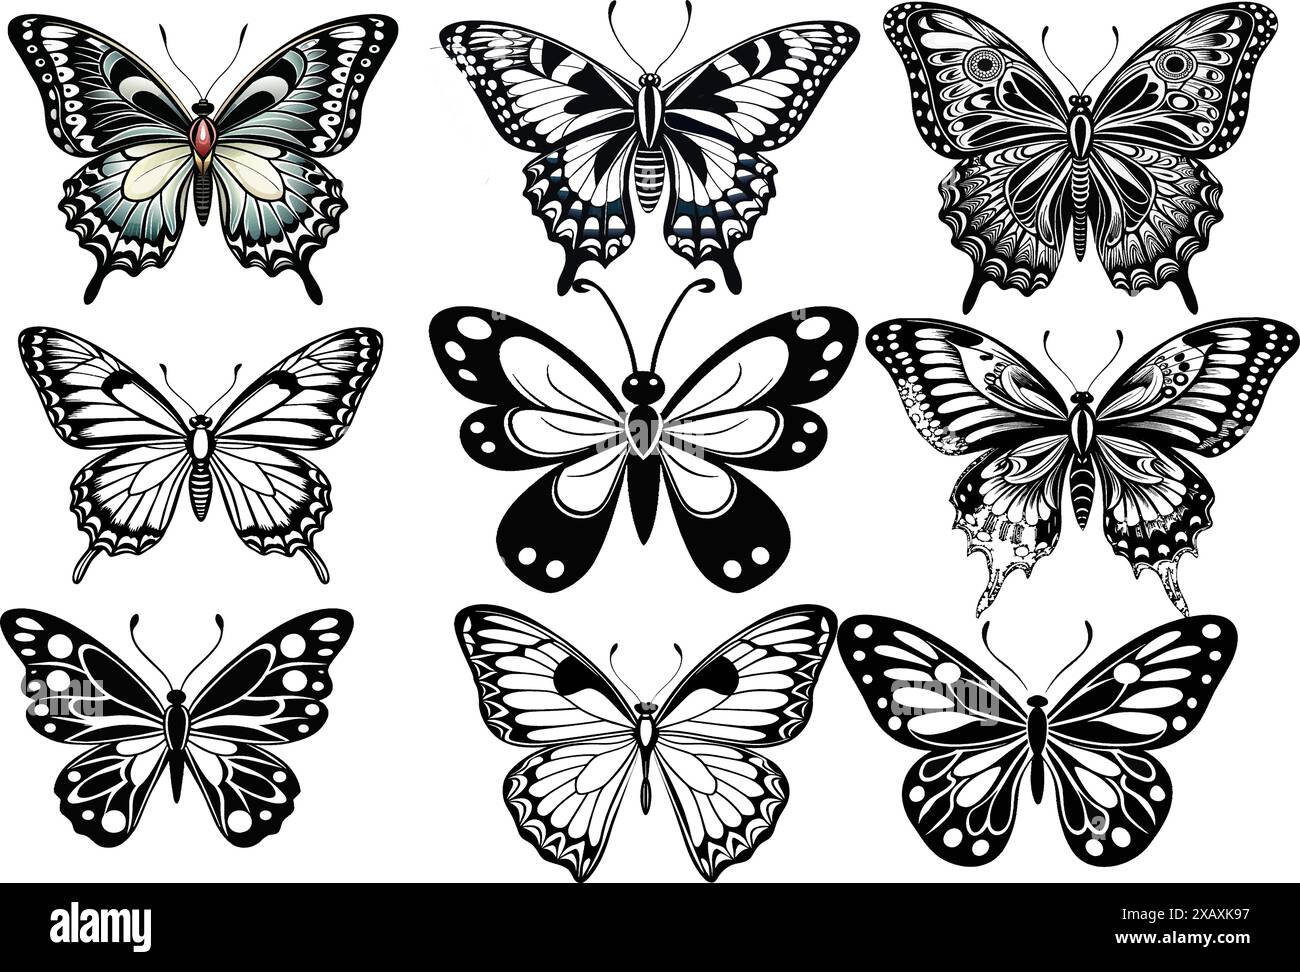 beautiful vector image of a butterfly silhouette isolated illustration. Stock Vector